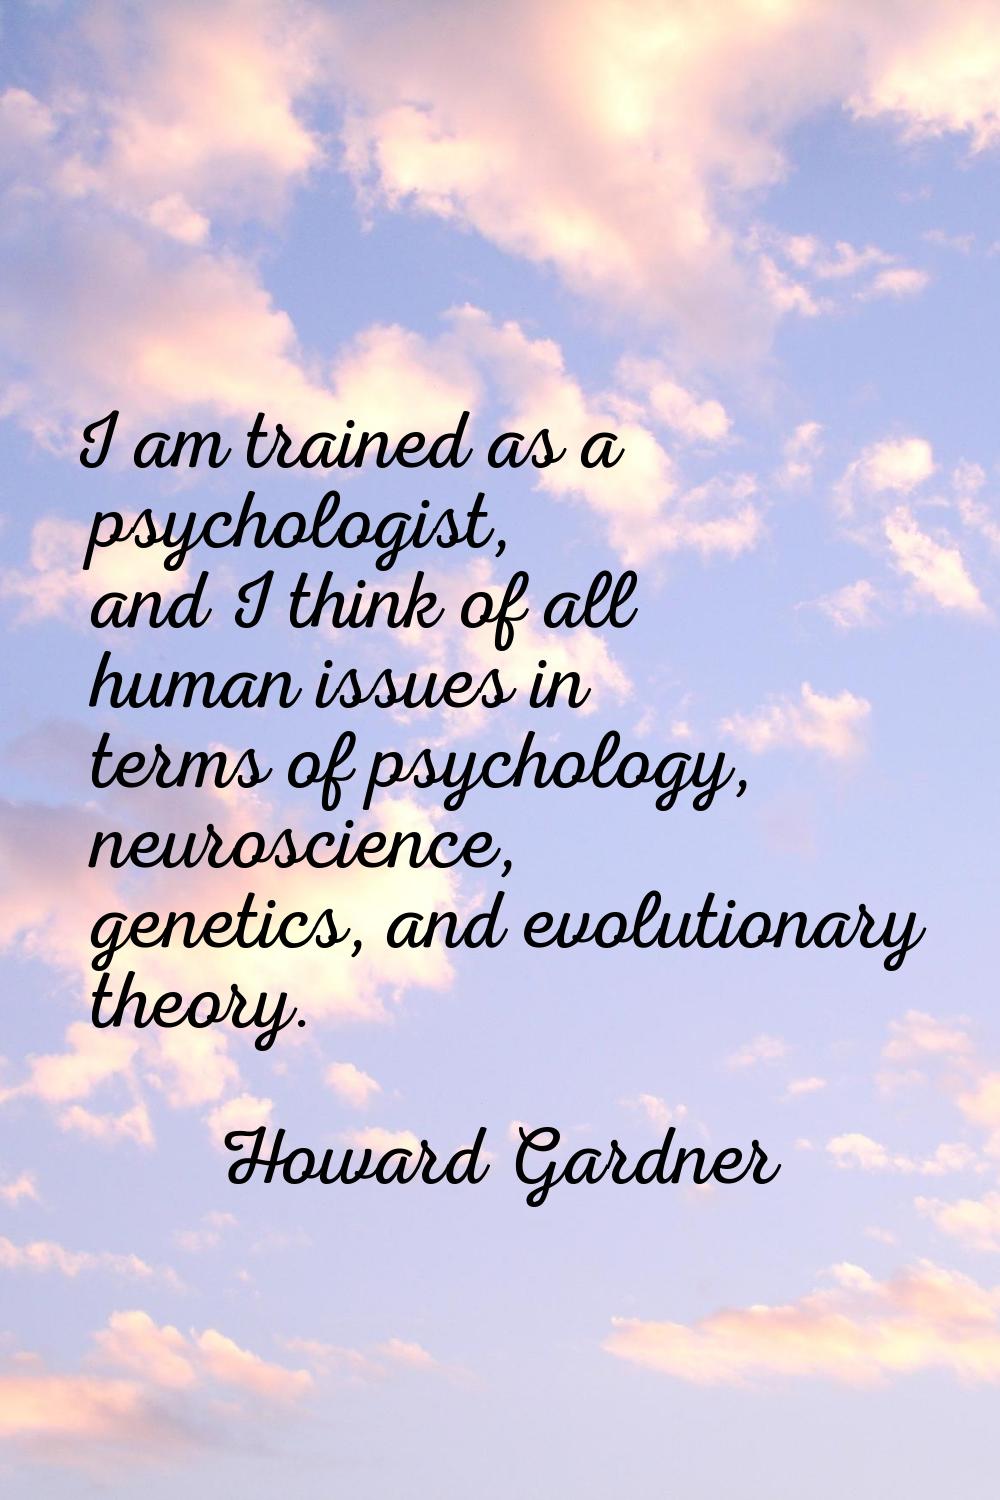 I am trained as a psychologist, and I think of all human issues in terms of psychology, neuroscienc